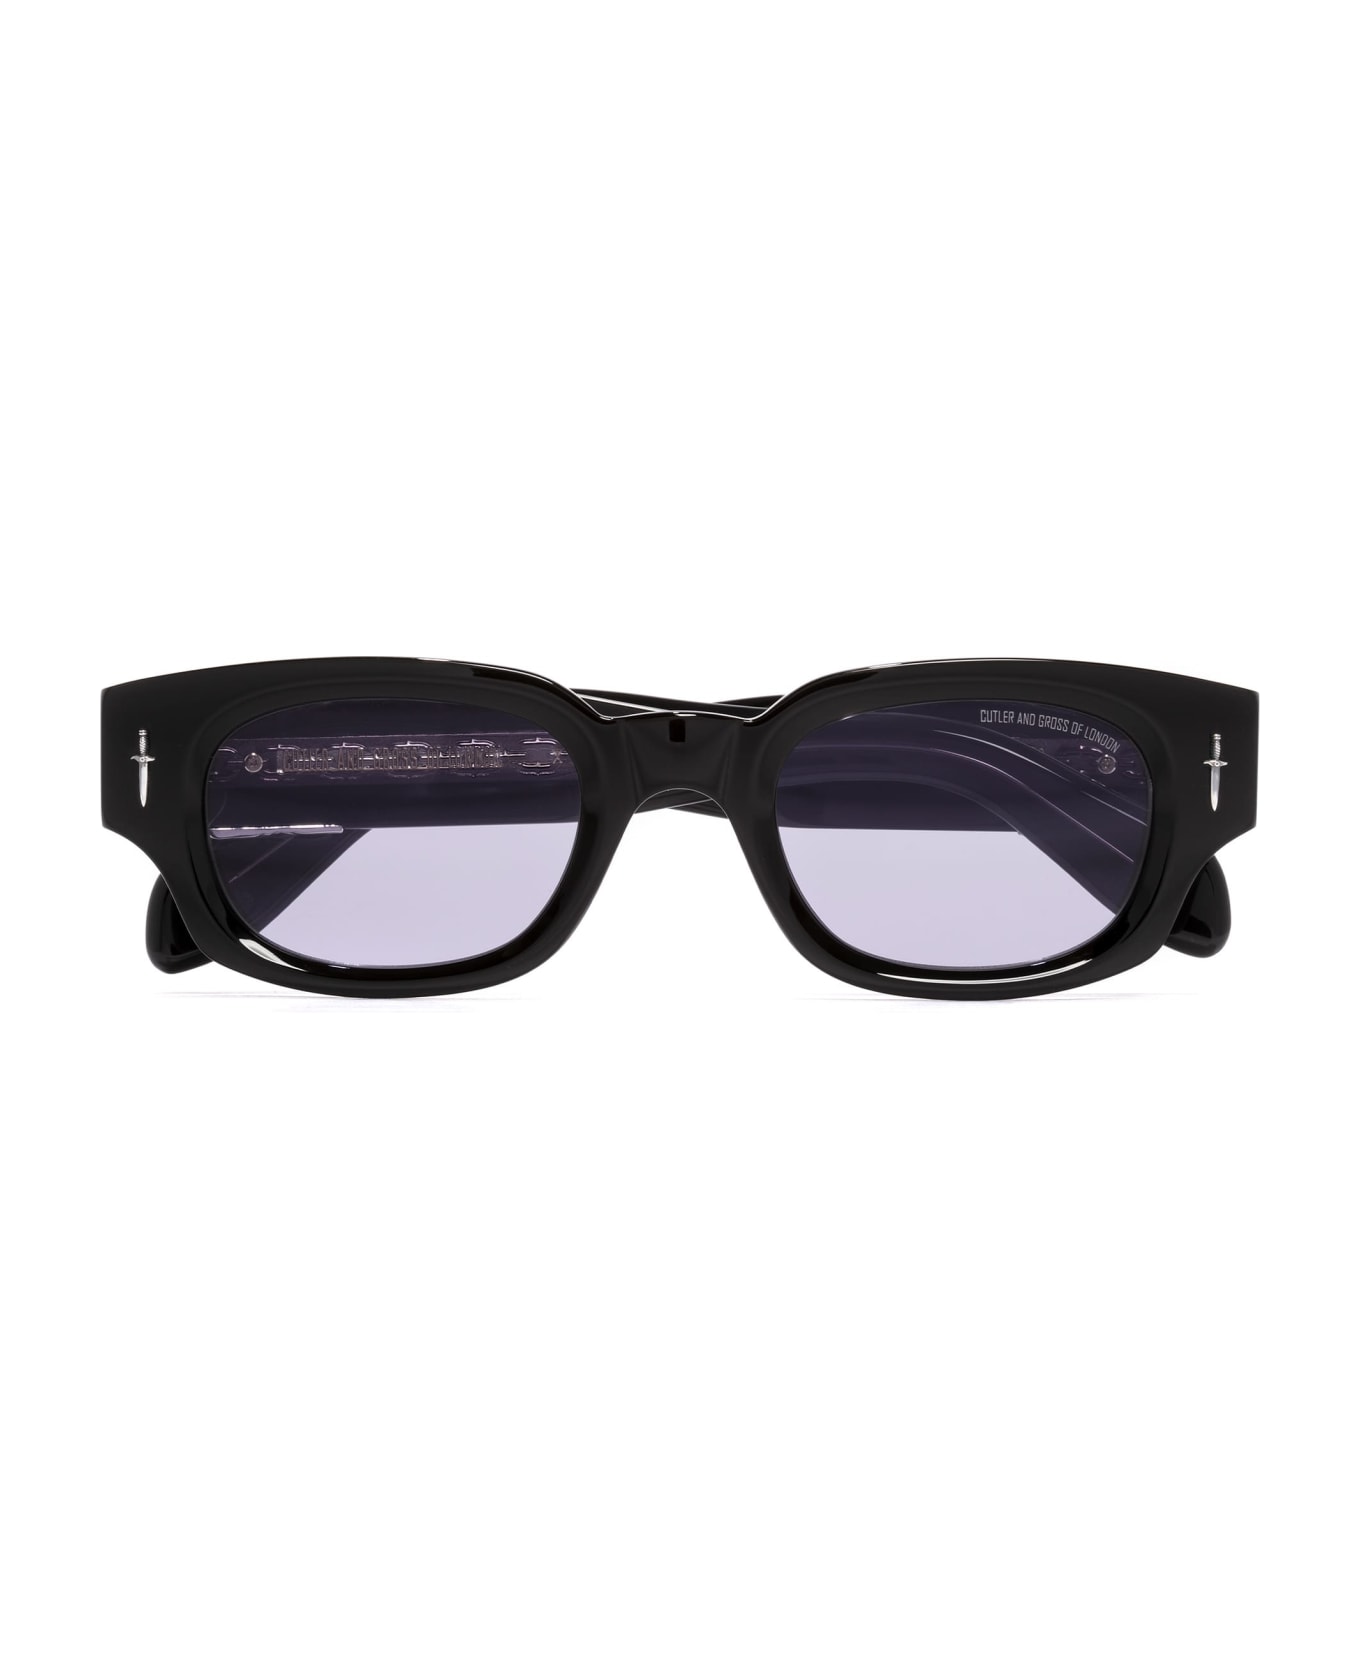 Cutler and Gross The Great Frog - Soaring Eagle / Black Sunglasses - Black